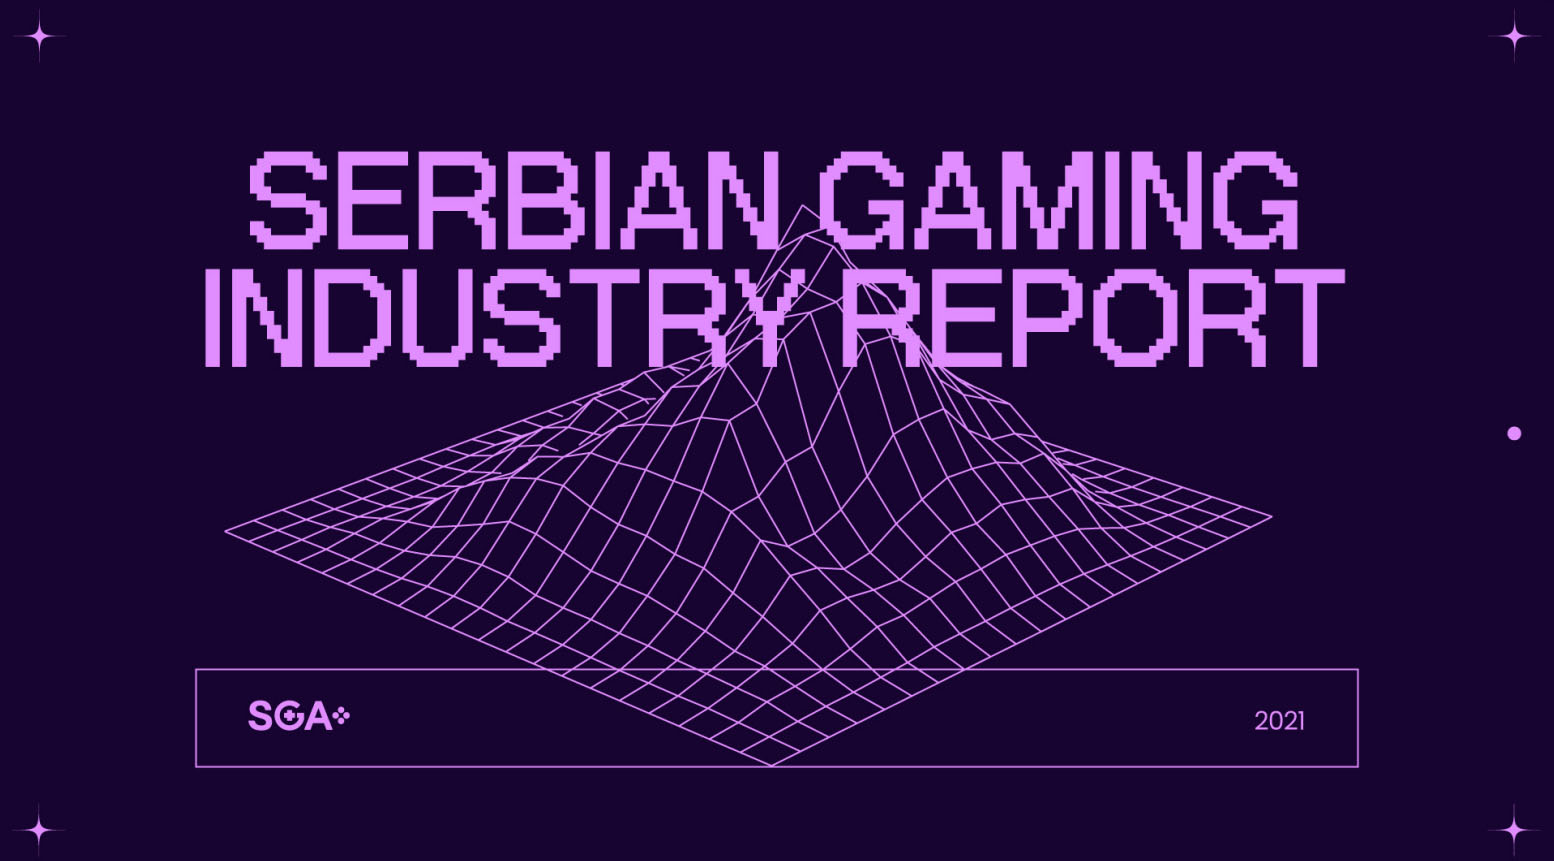 An image showing the Serbian Gaming Industry Report